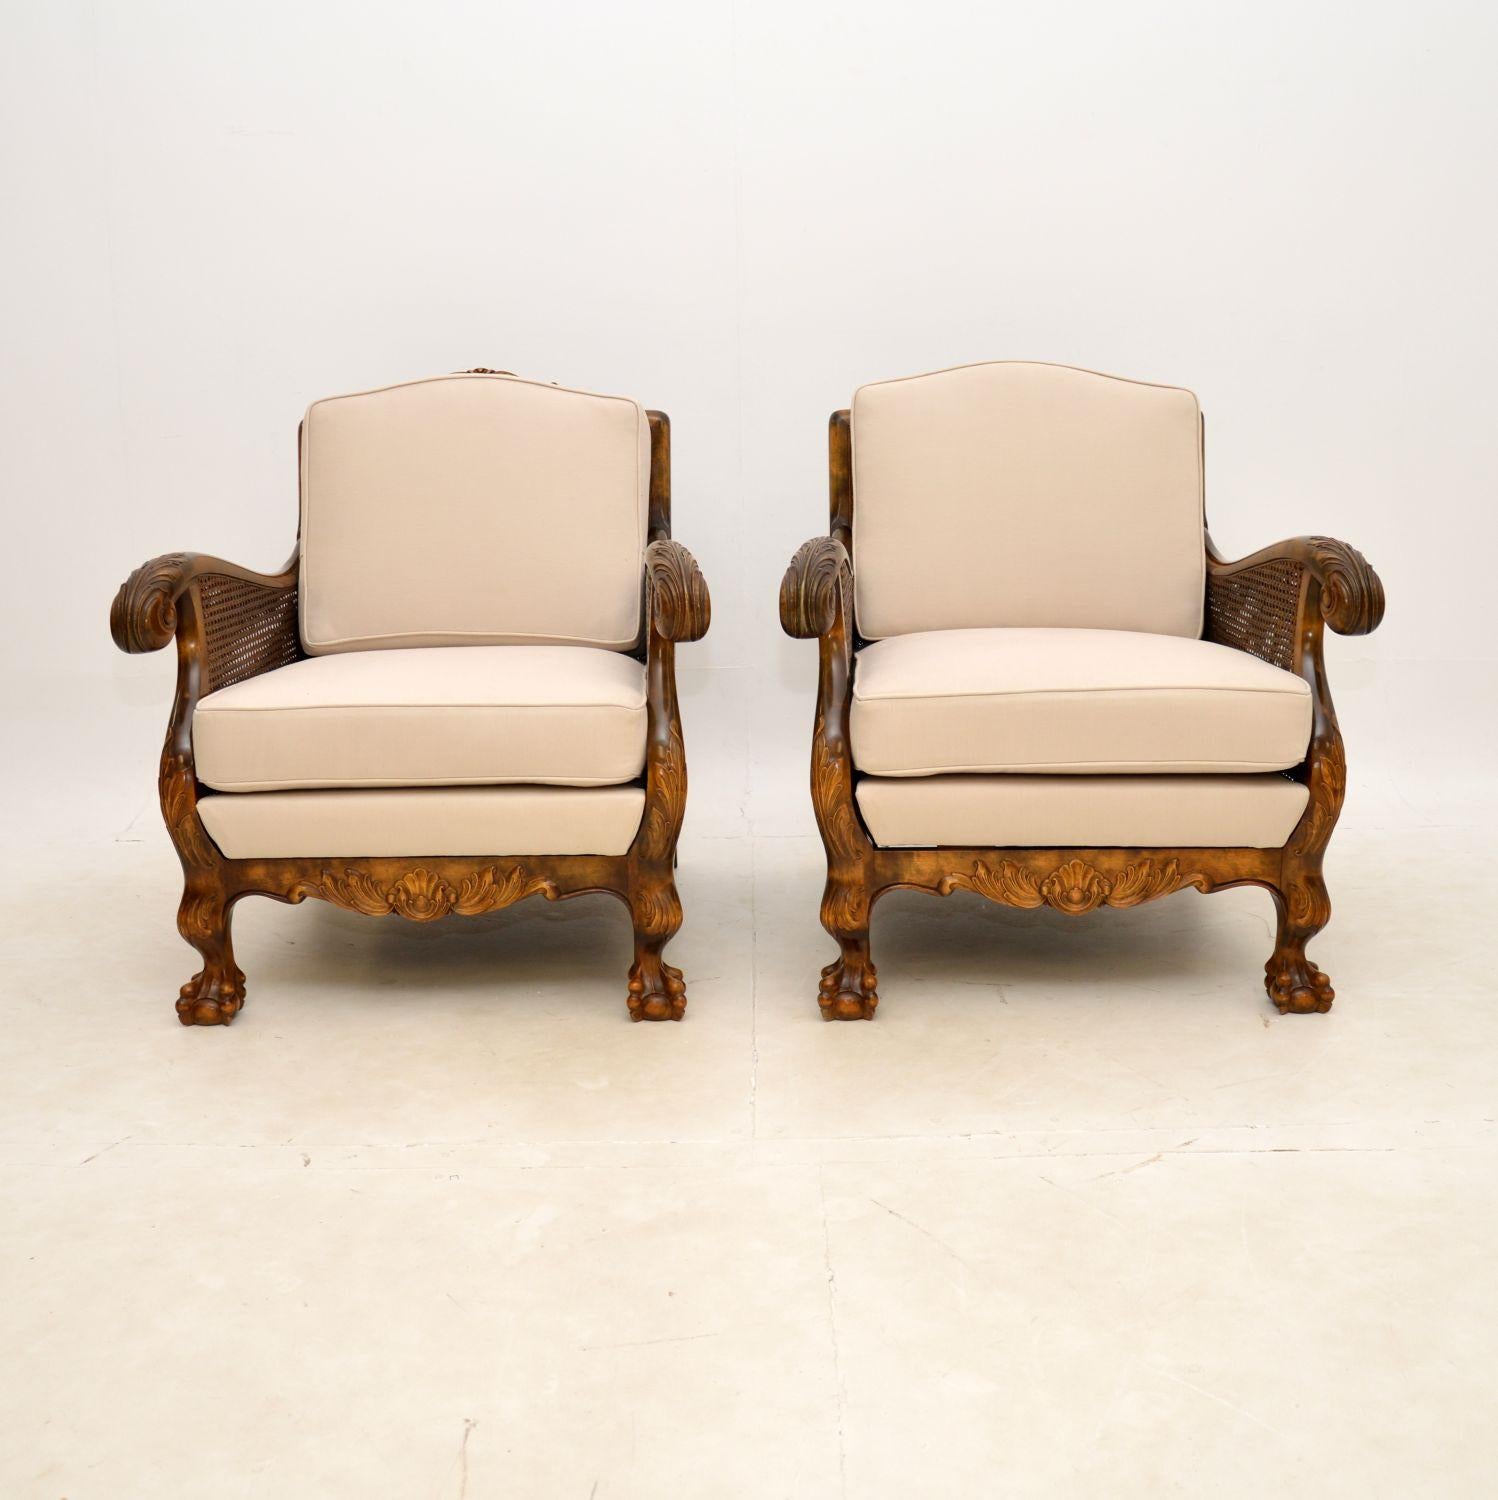 Pair of antique Chippendale style Swedish satin birch bergere armchairs in excellent condition & dating to around the 1920-1930s period.

These armchairs have beautifully shaped frames & detailed carvings all over. They are double caned on the